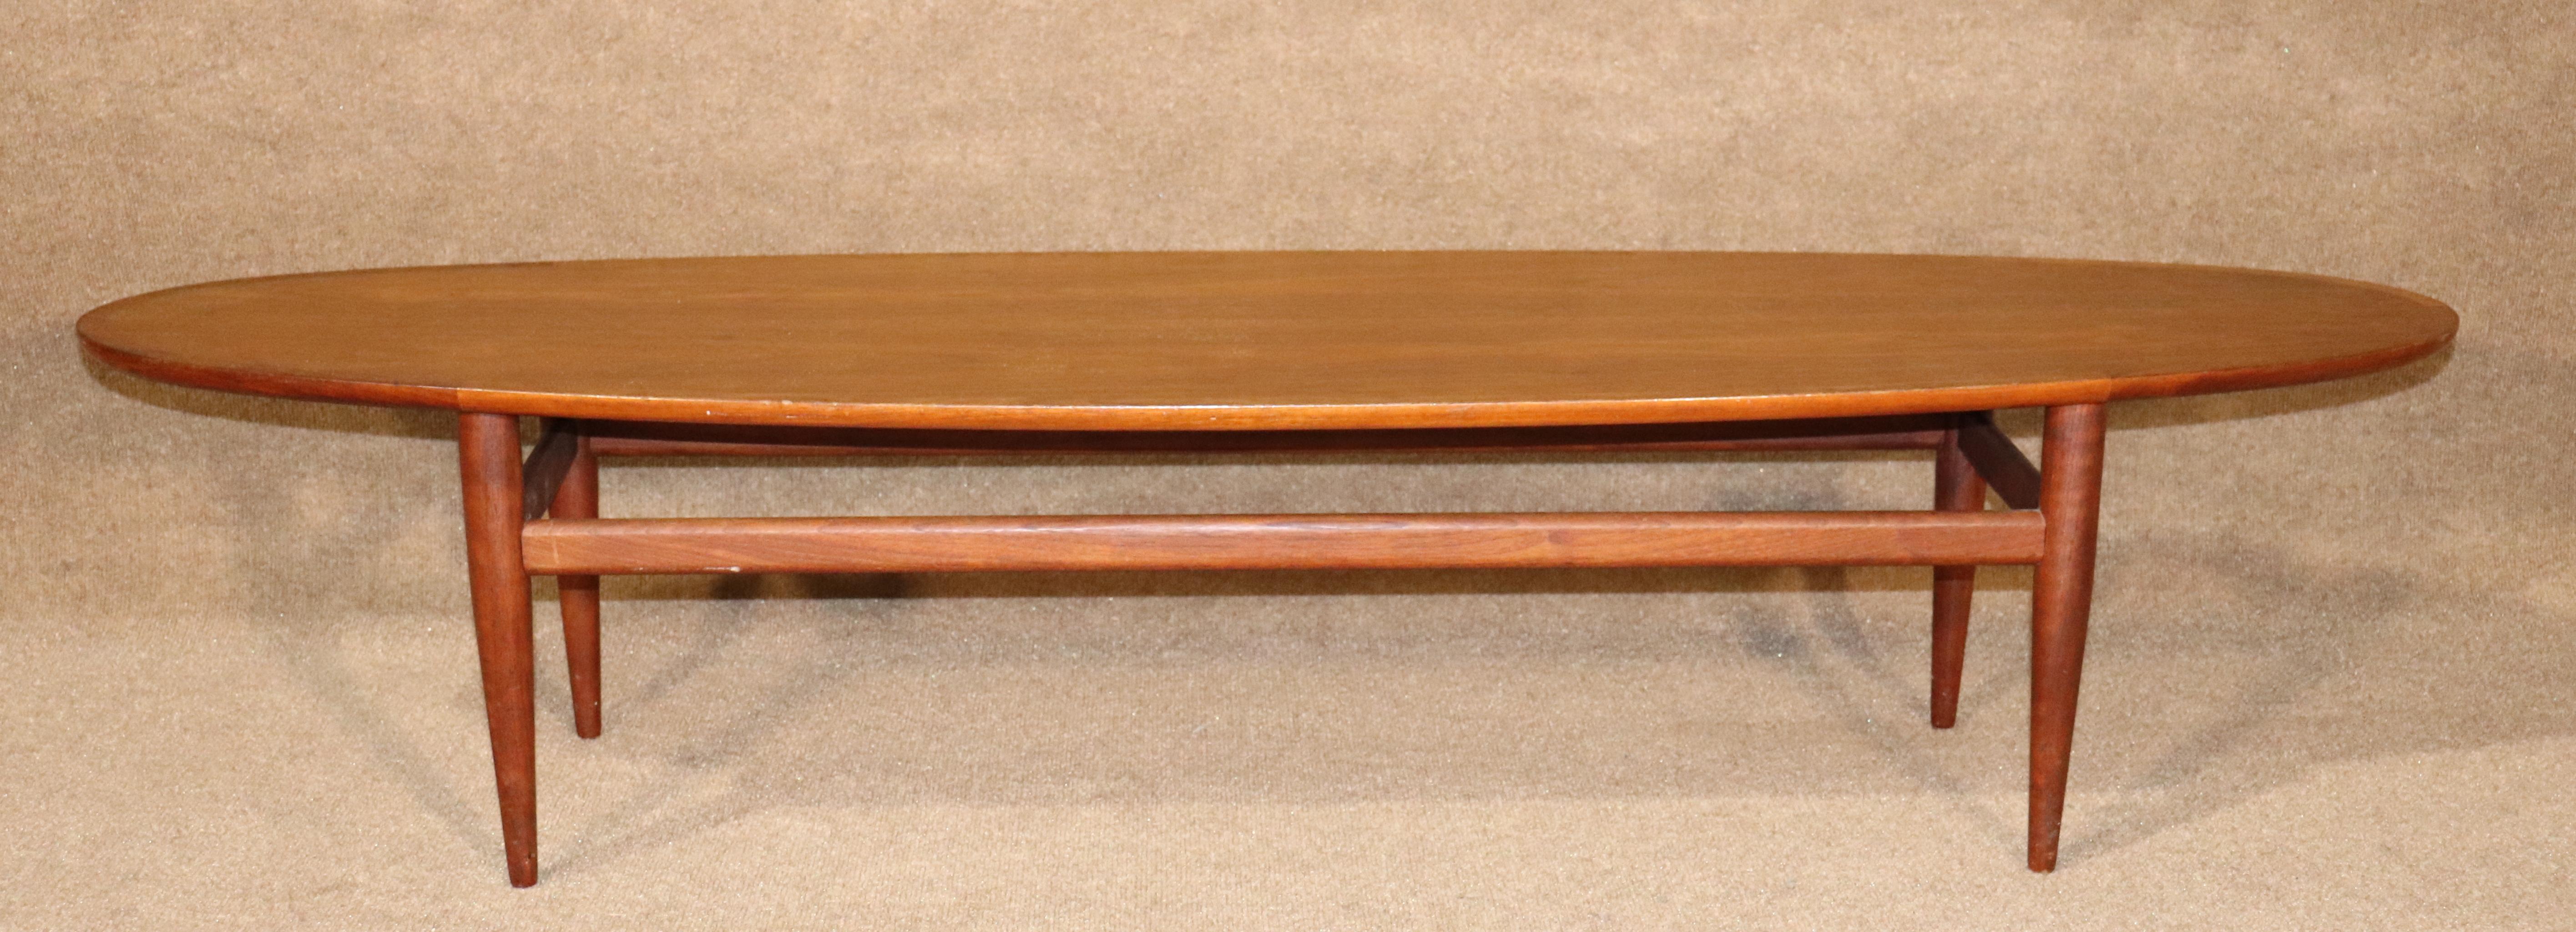 Oval surfboard coffee table by Henredon with added walnut trim and tapered legs.
Please confirm location.